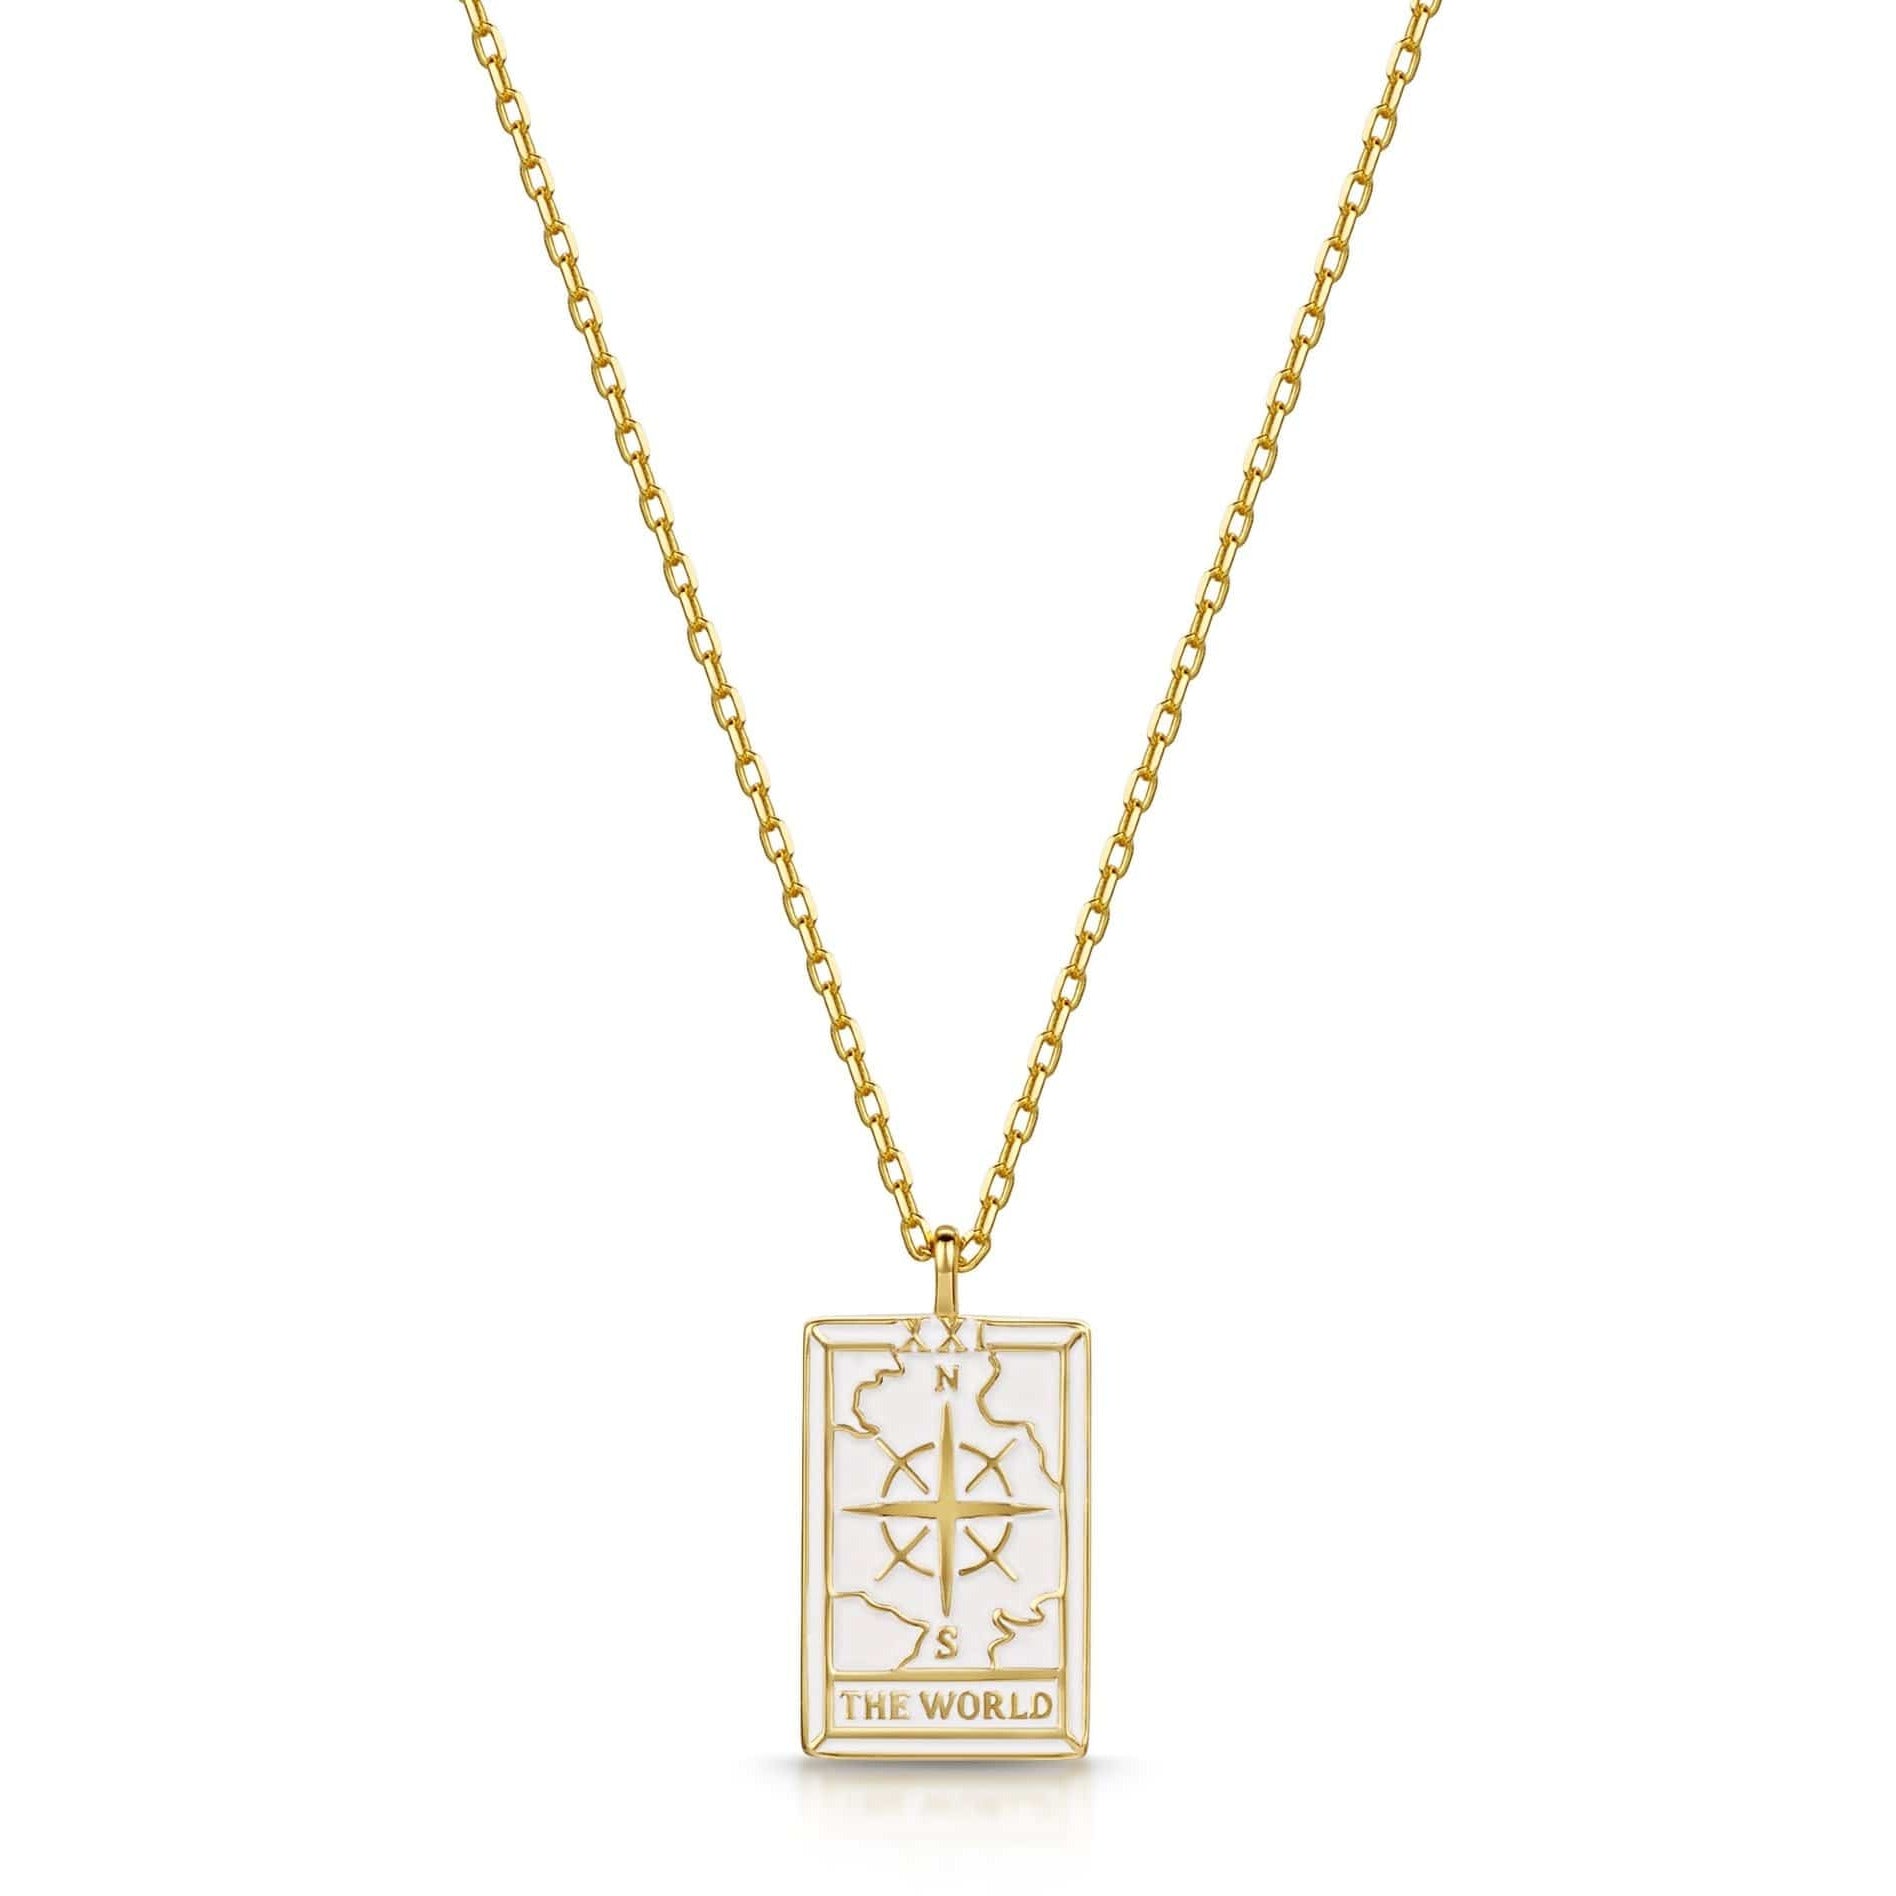 Fervor Montreal Necklace Tarot Card- The World Reversible Necklace